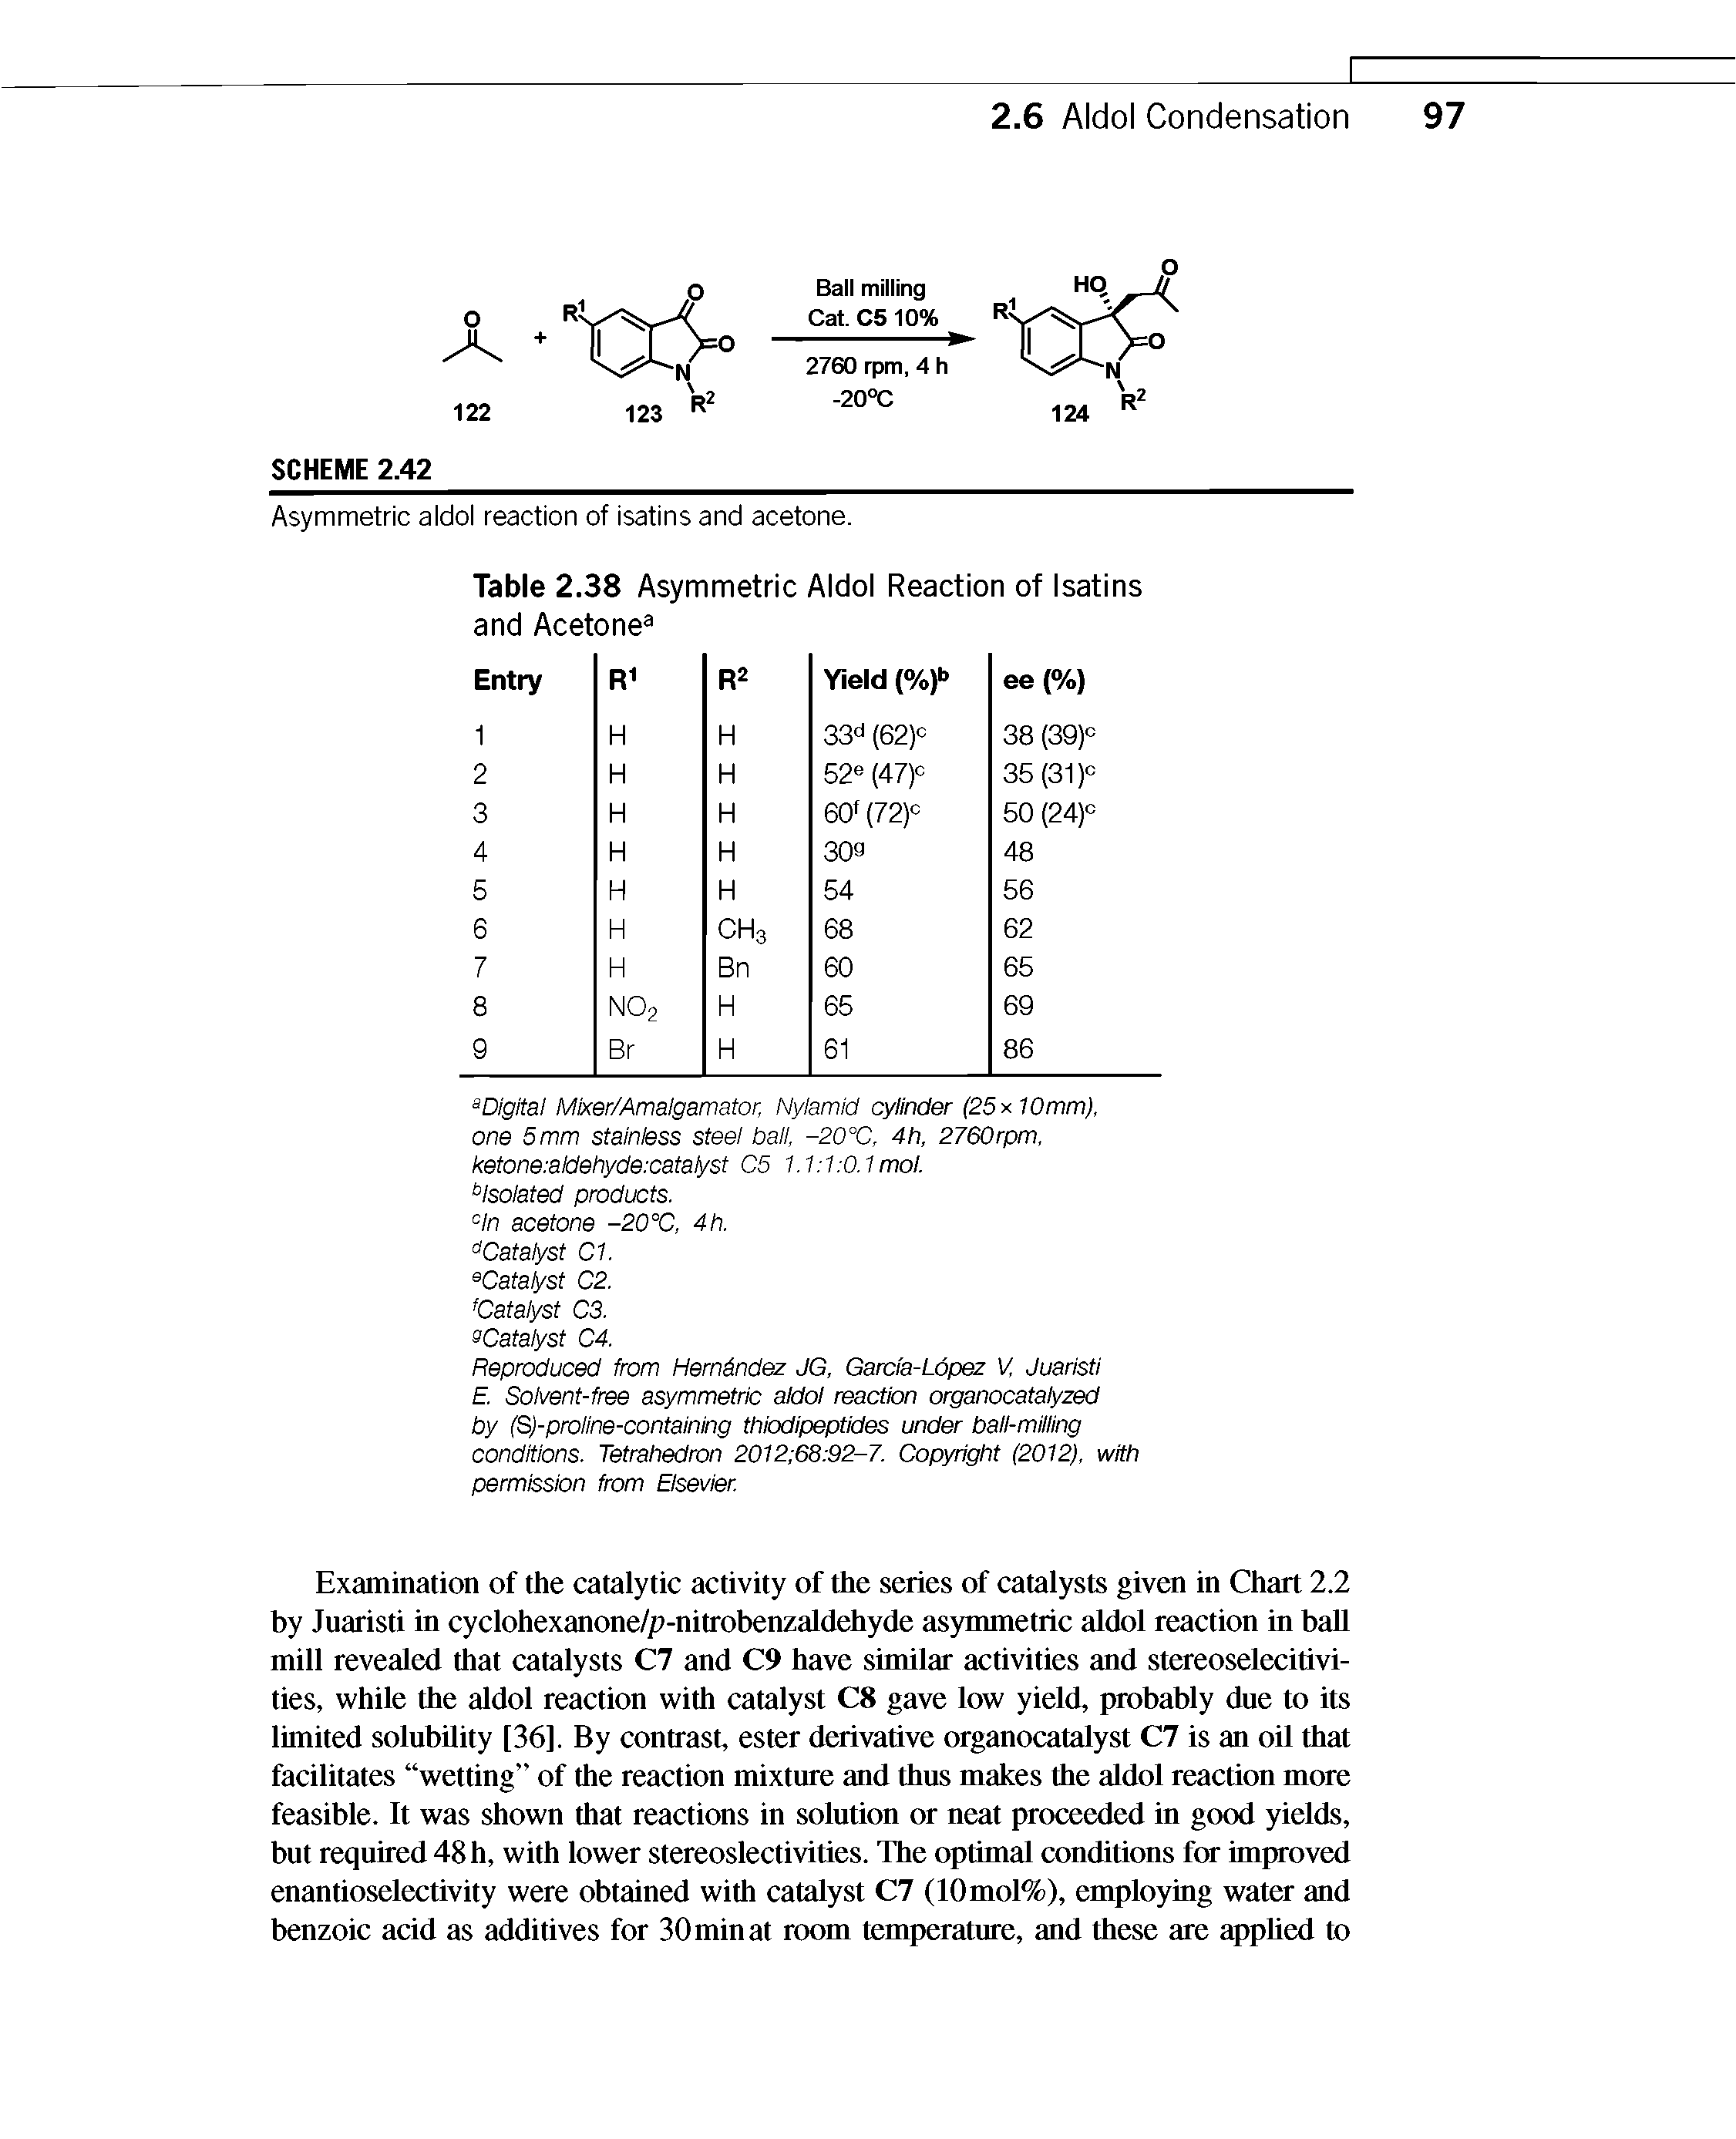 Table 2.38 Asymmetric Aldol Reaction of Isatins and Acetone ...